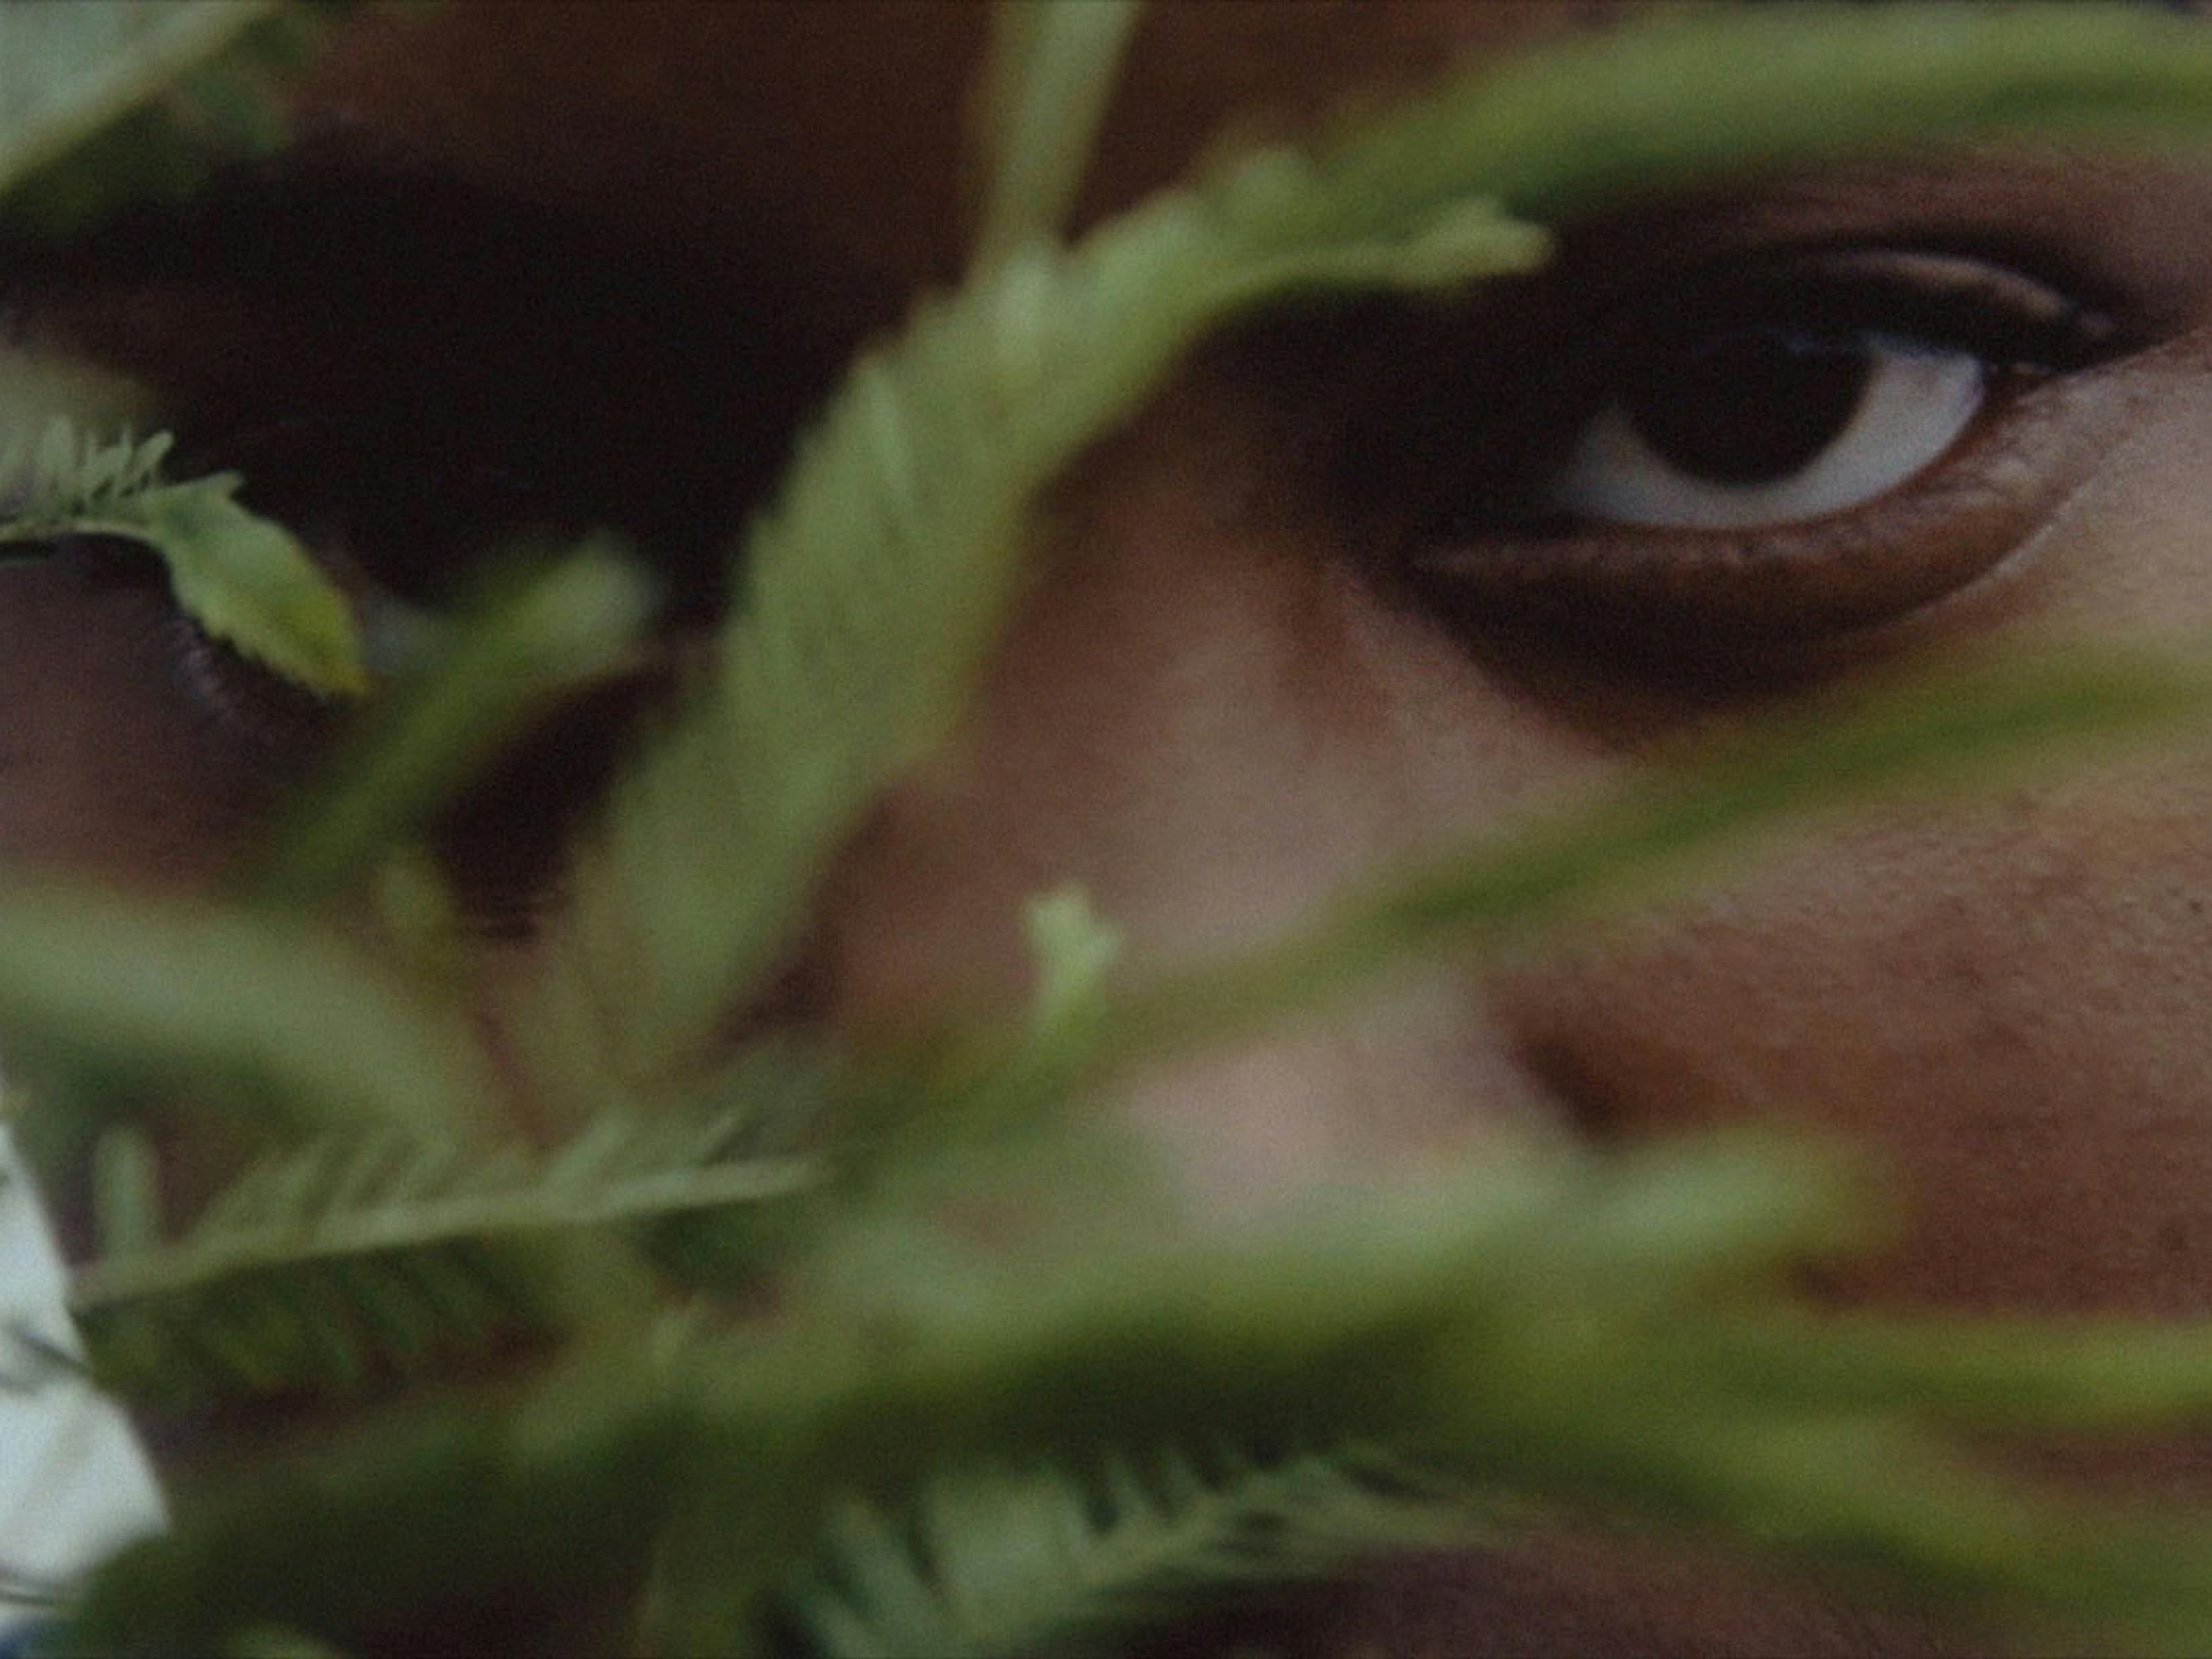 A close-up of a girl’s face. She peers intensely through some greenery.